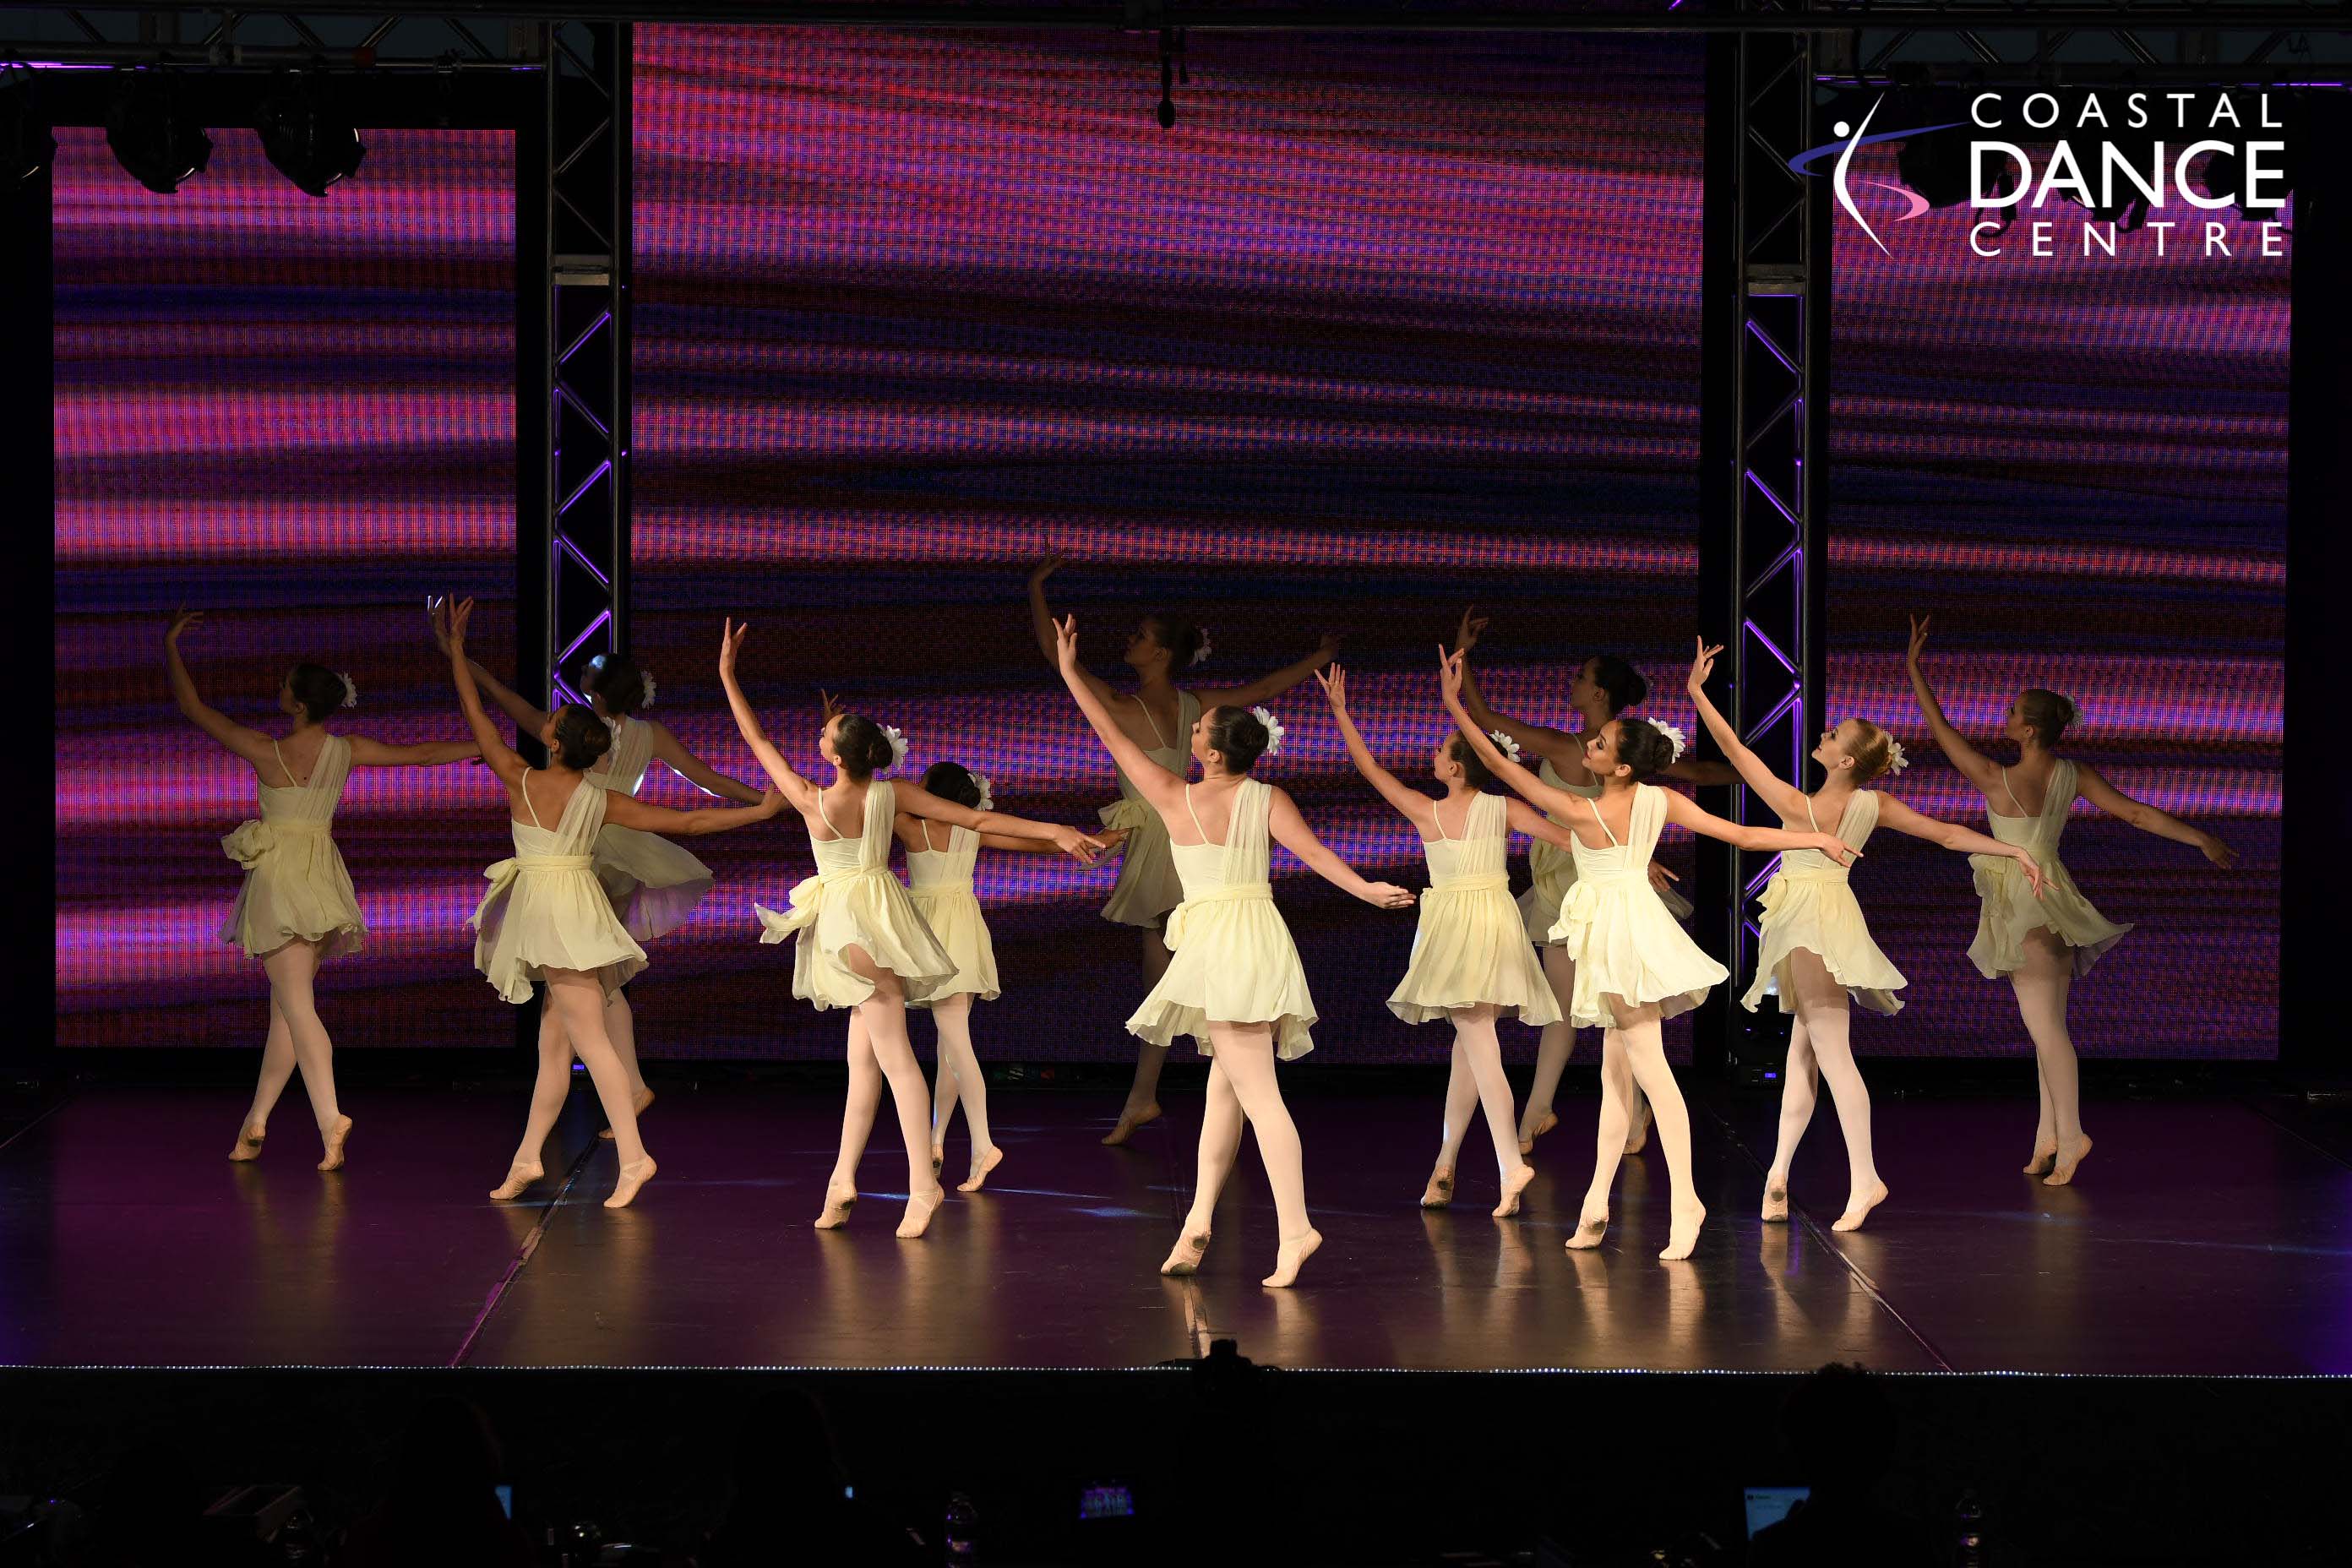 The dancers perform "Pagdiriwang" at Showstoppers Myrtle Beach.